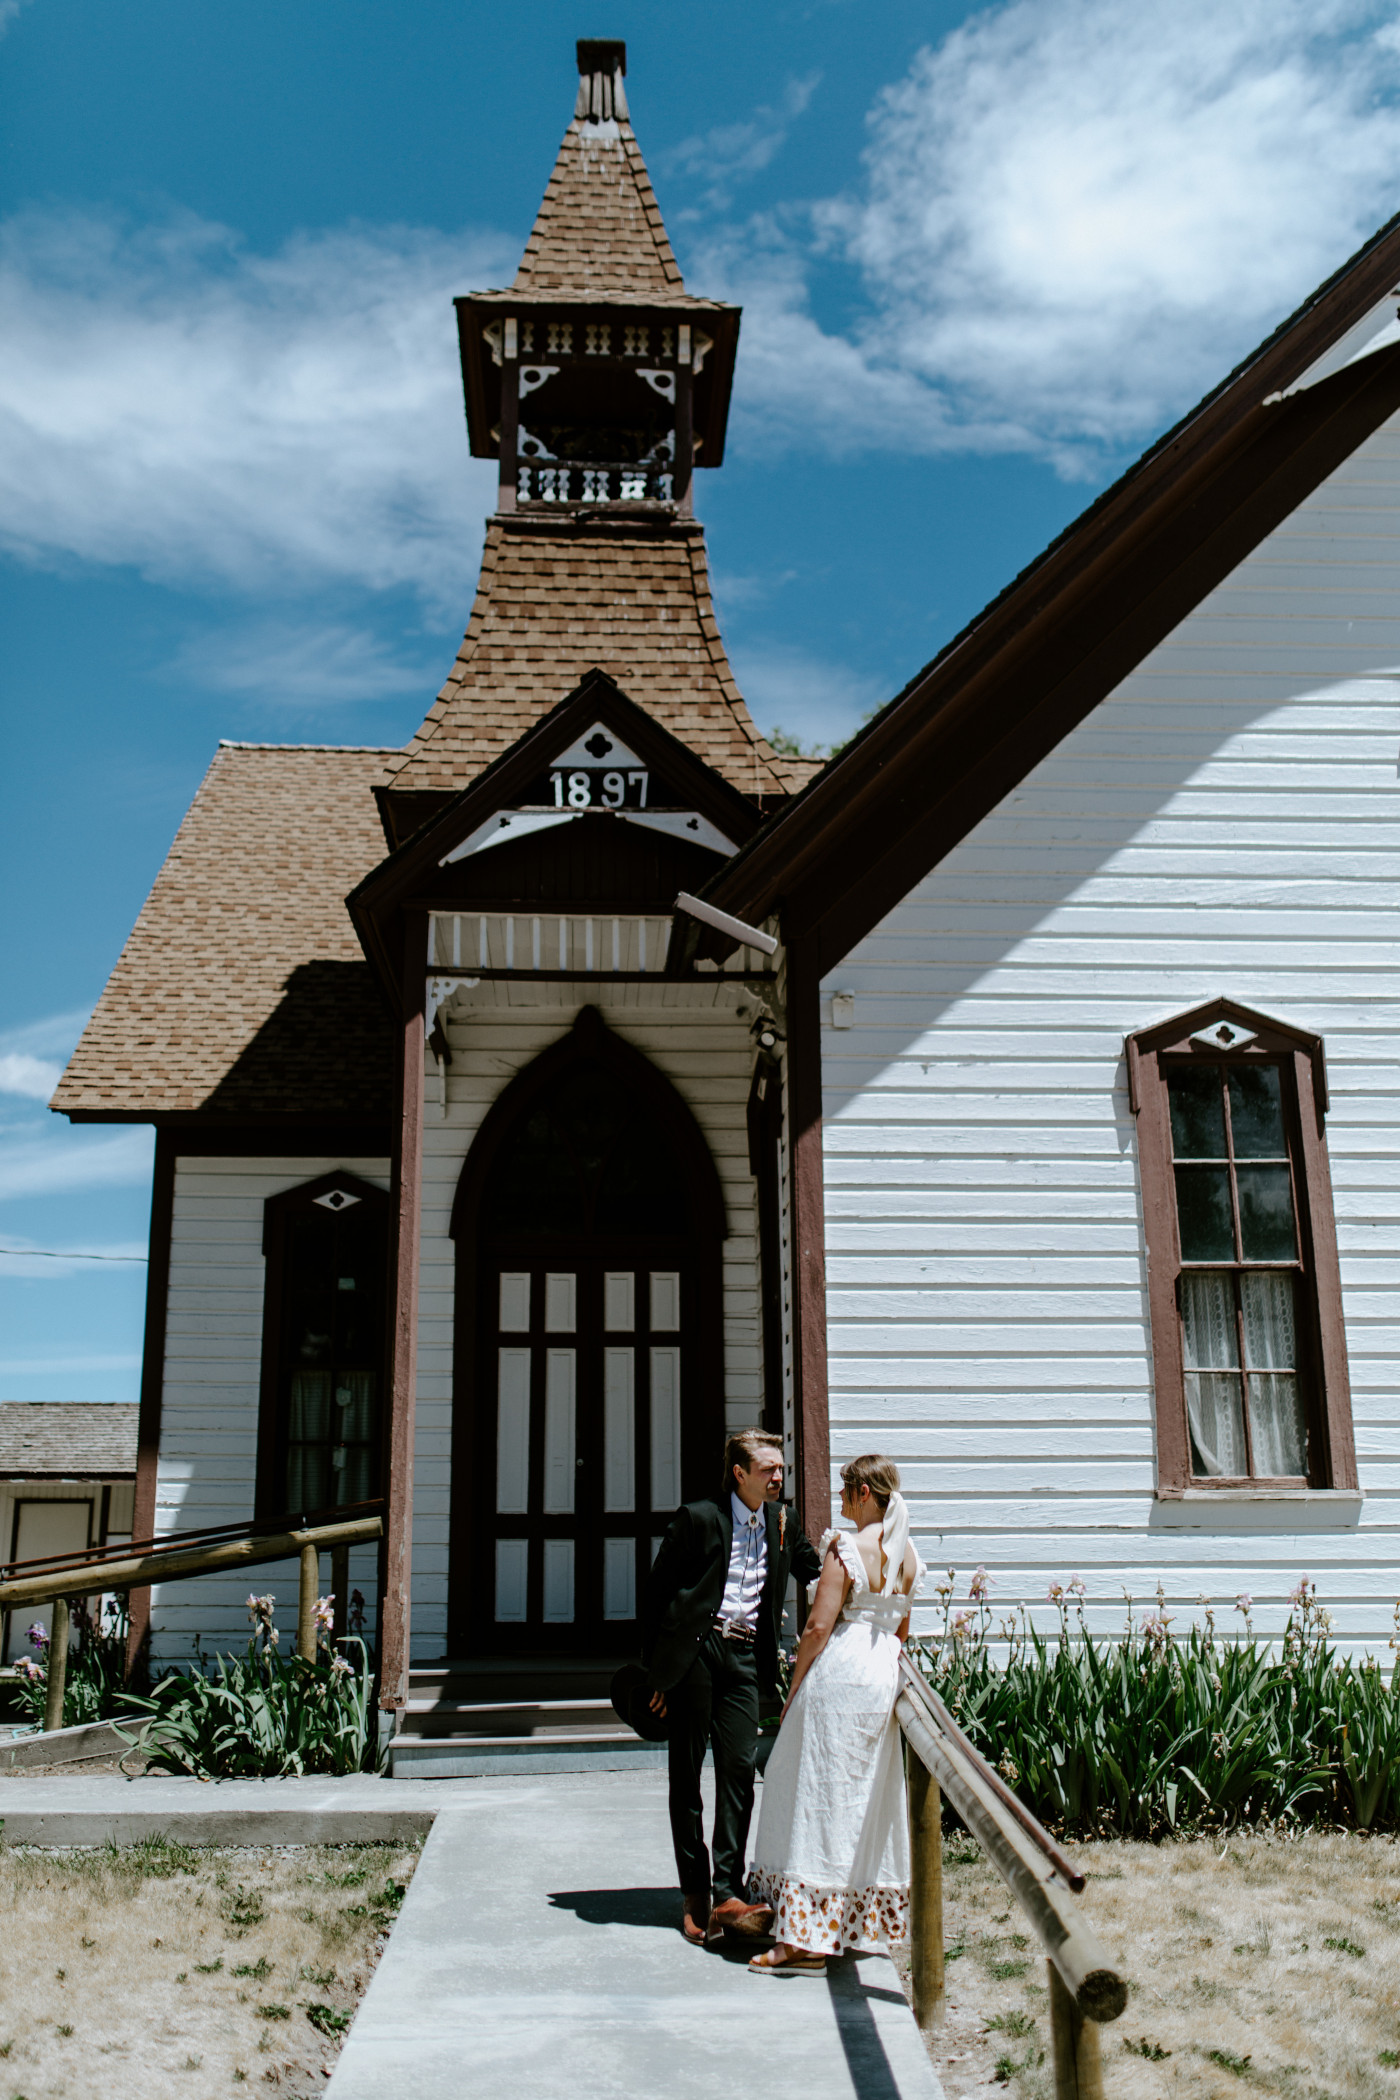 Emily and Greyson hang out in front of a church. Elopement photography in the Central Oregon desert by Sienna Plus Josh.